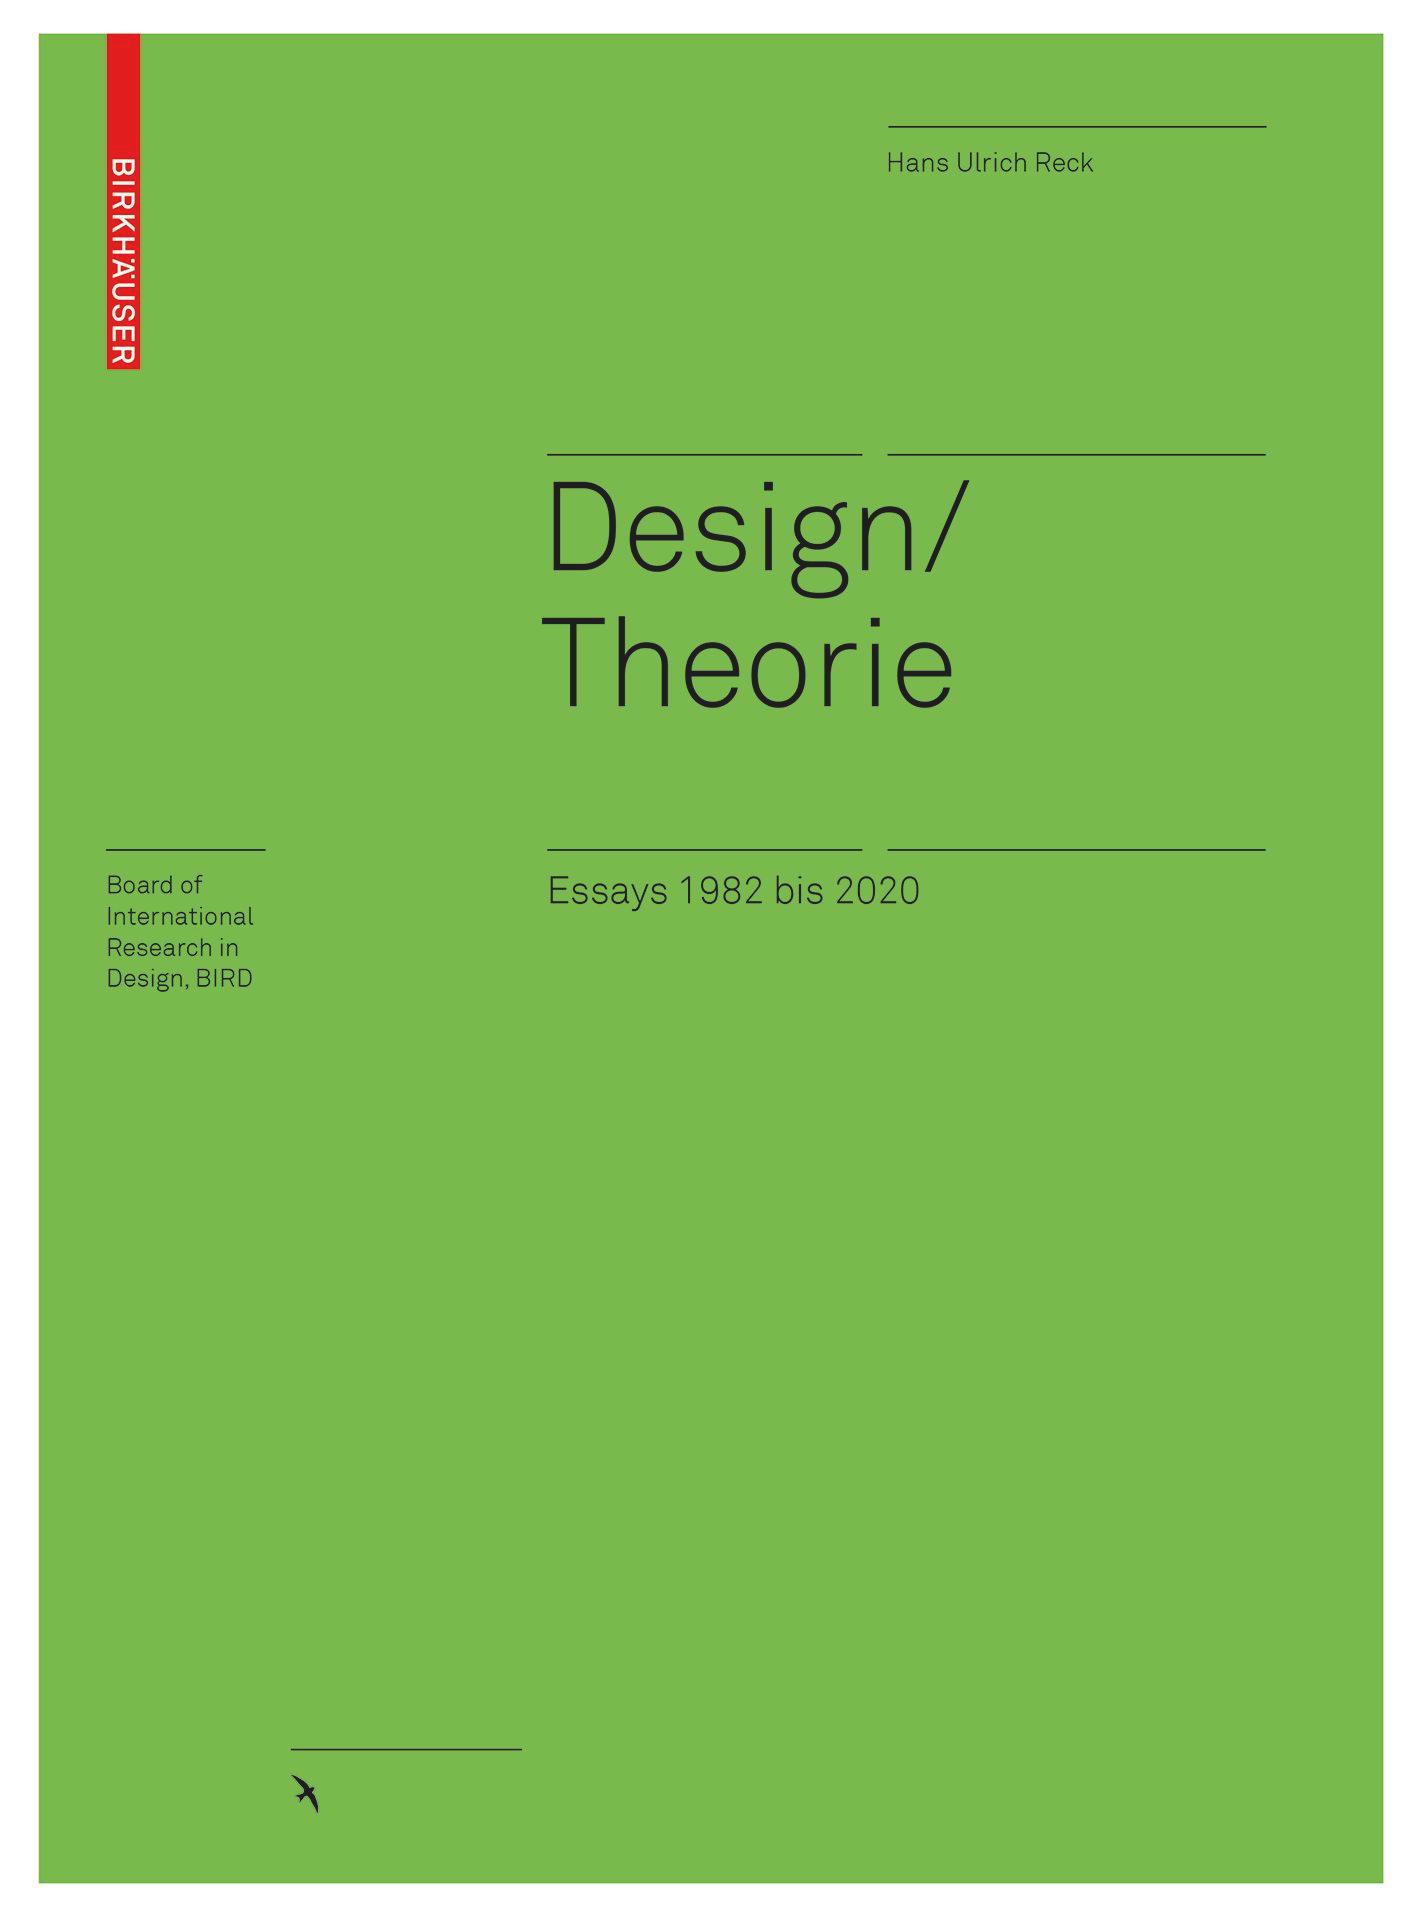 Design/Theorie's cover